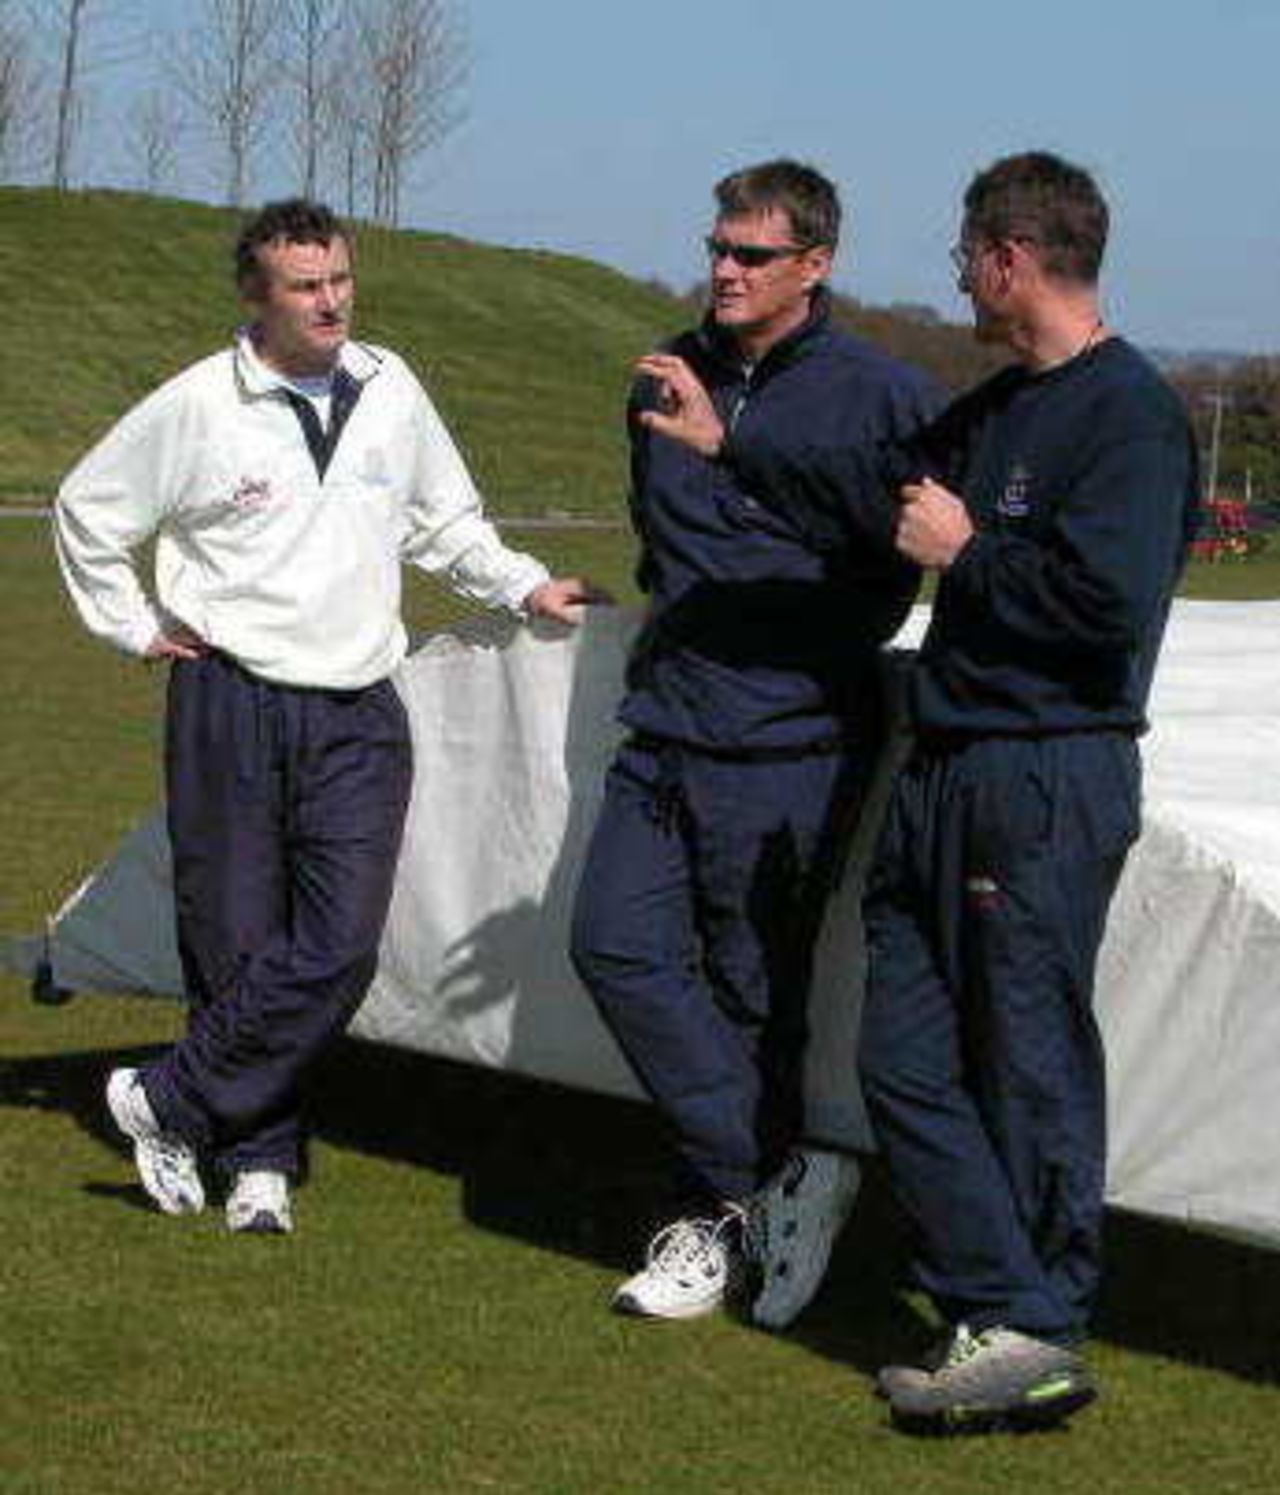 From left to right Tony Middleton, Paul Terry and Giles White reviewing net practise.